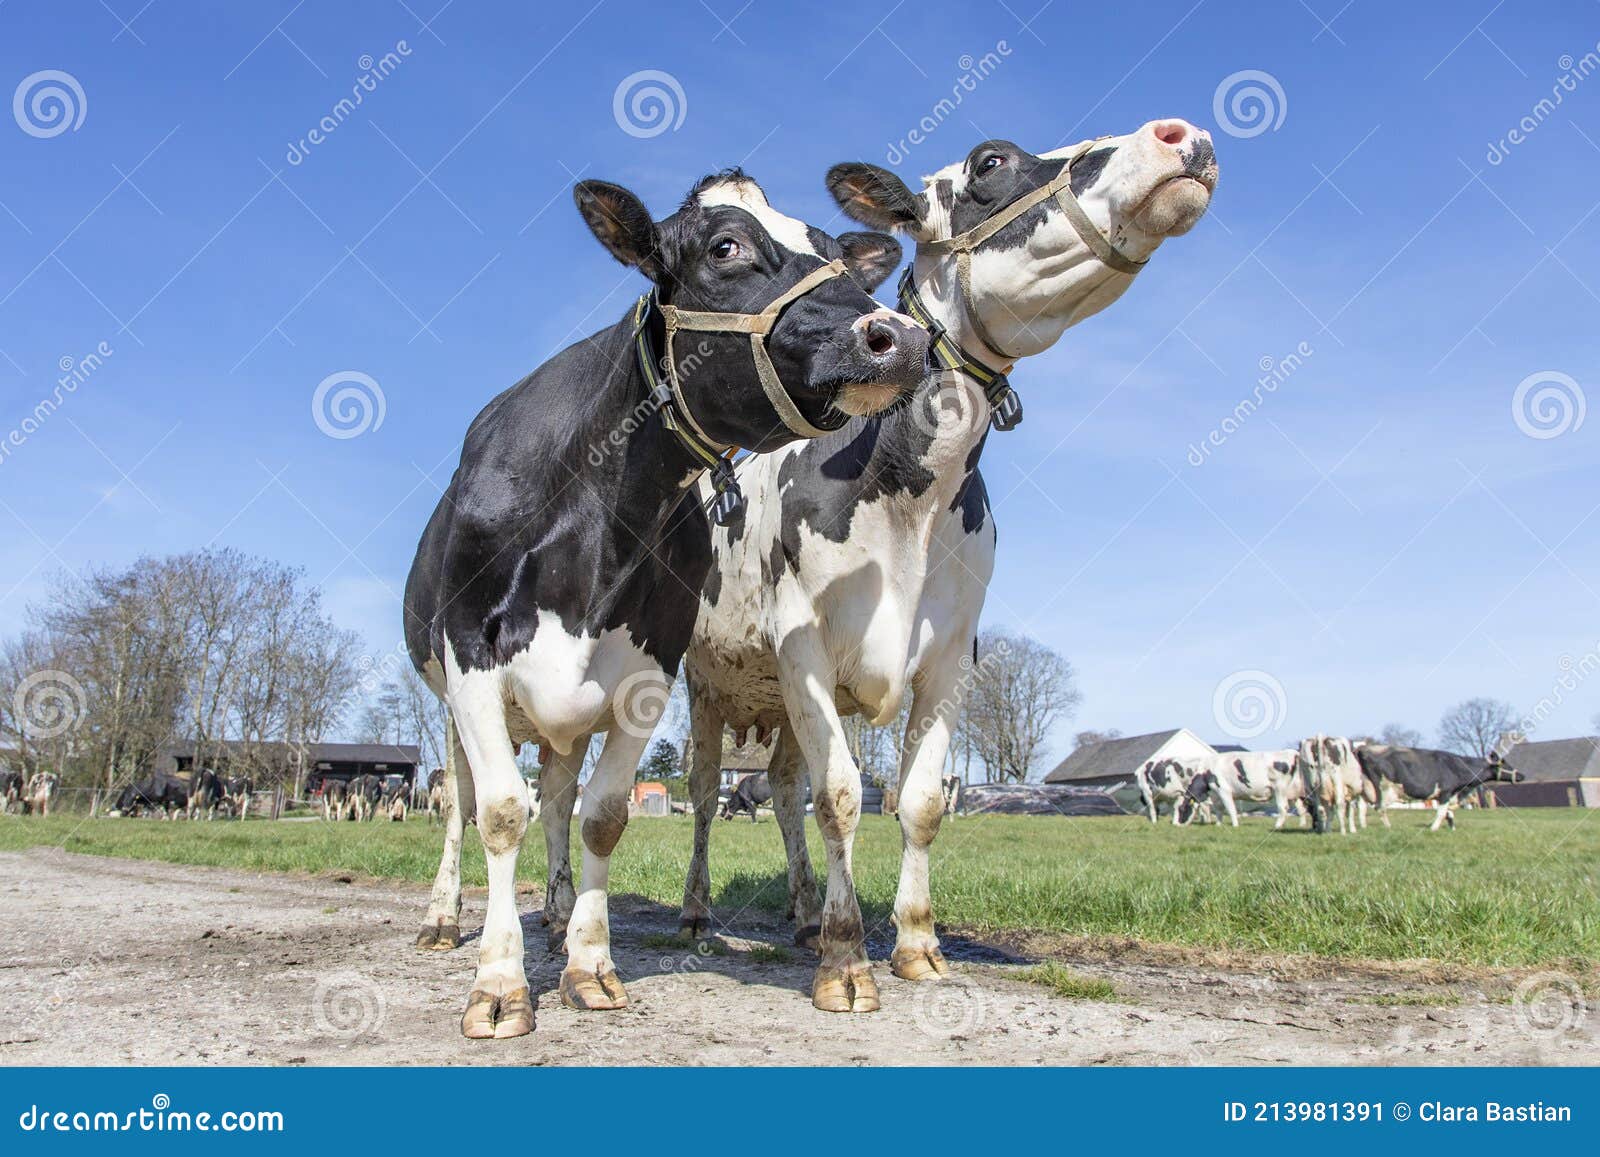 Two Cows Playfully Keeping Up Their Head, Funny and Arrogant, Both Cows ...